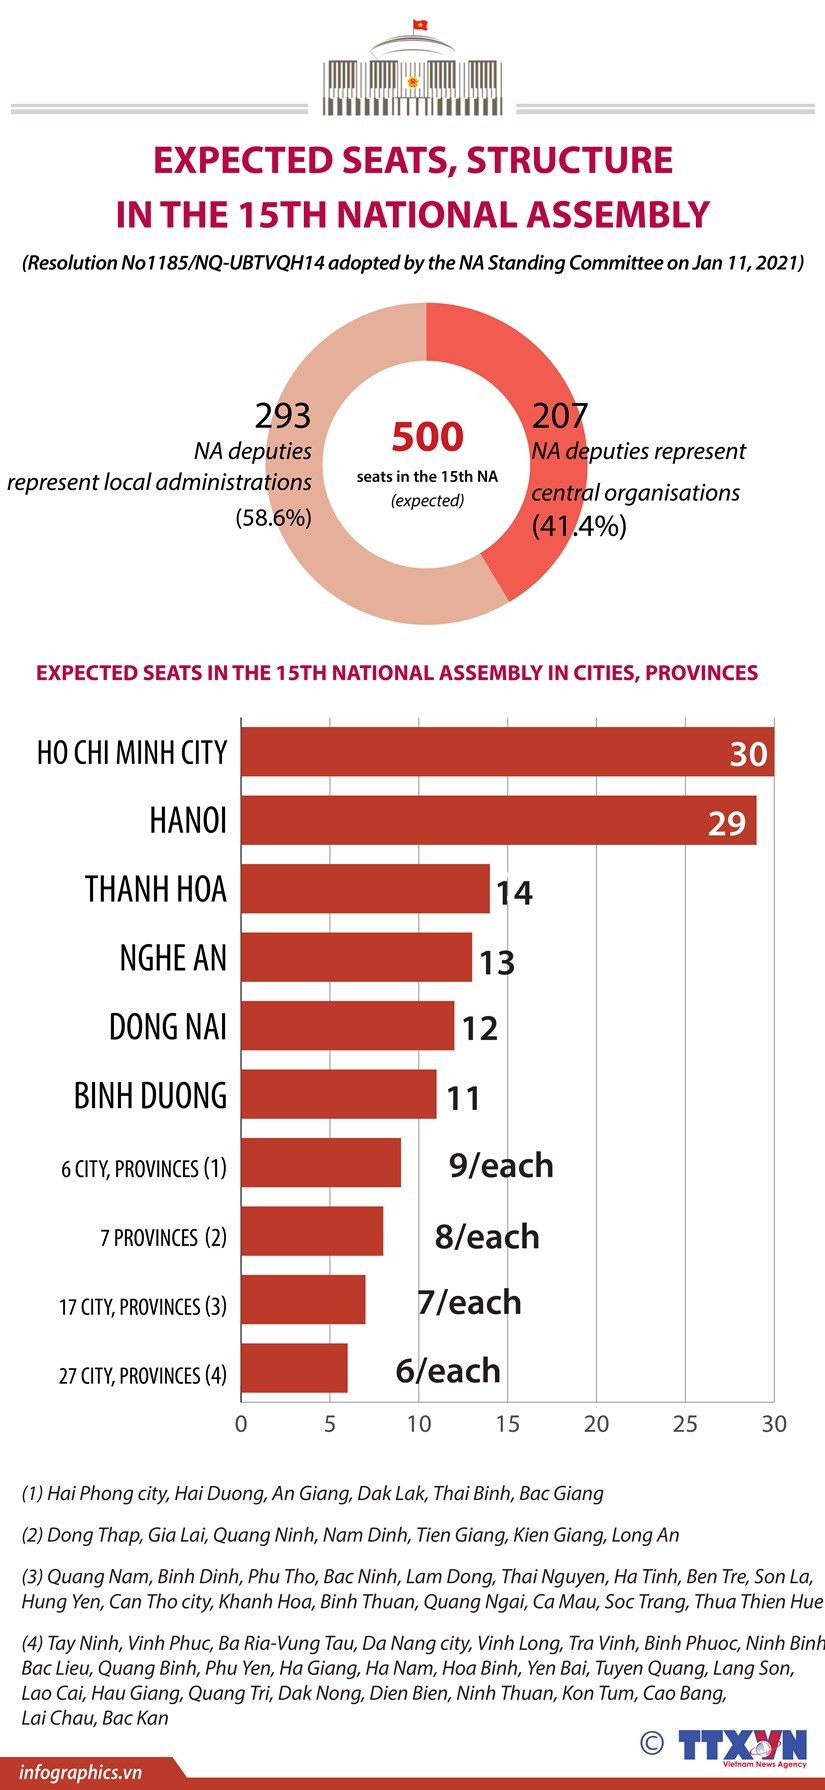 15th National Assembly expected to have 500 seats ảnh 1